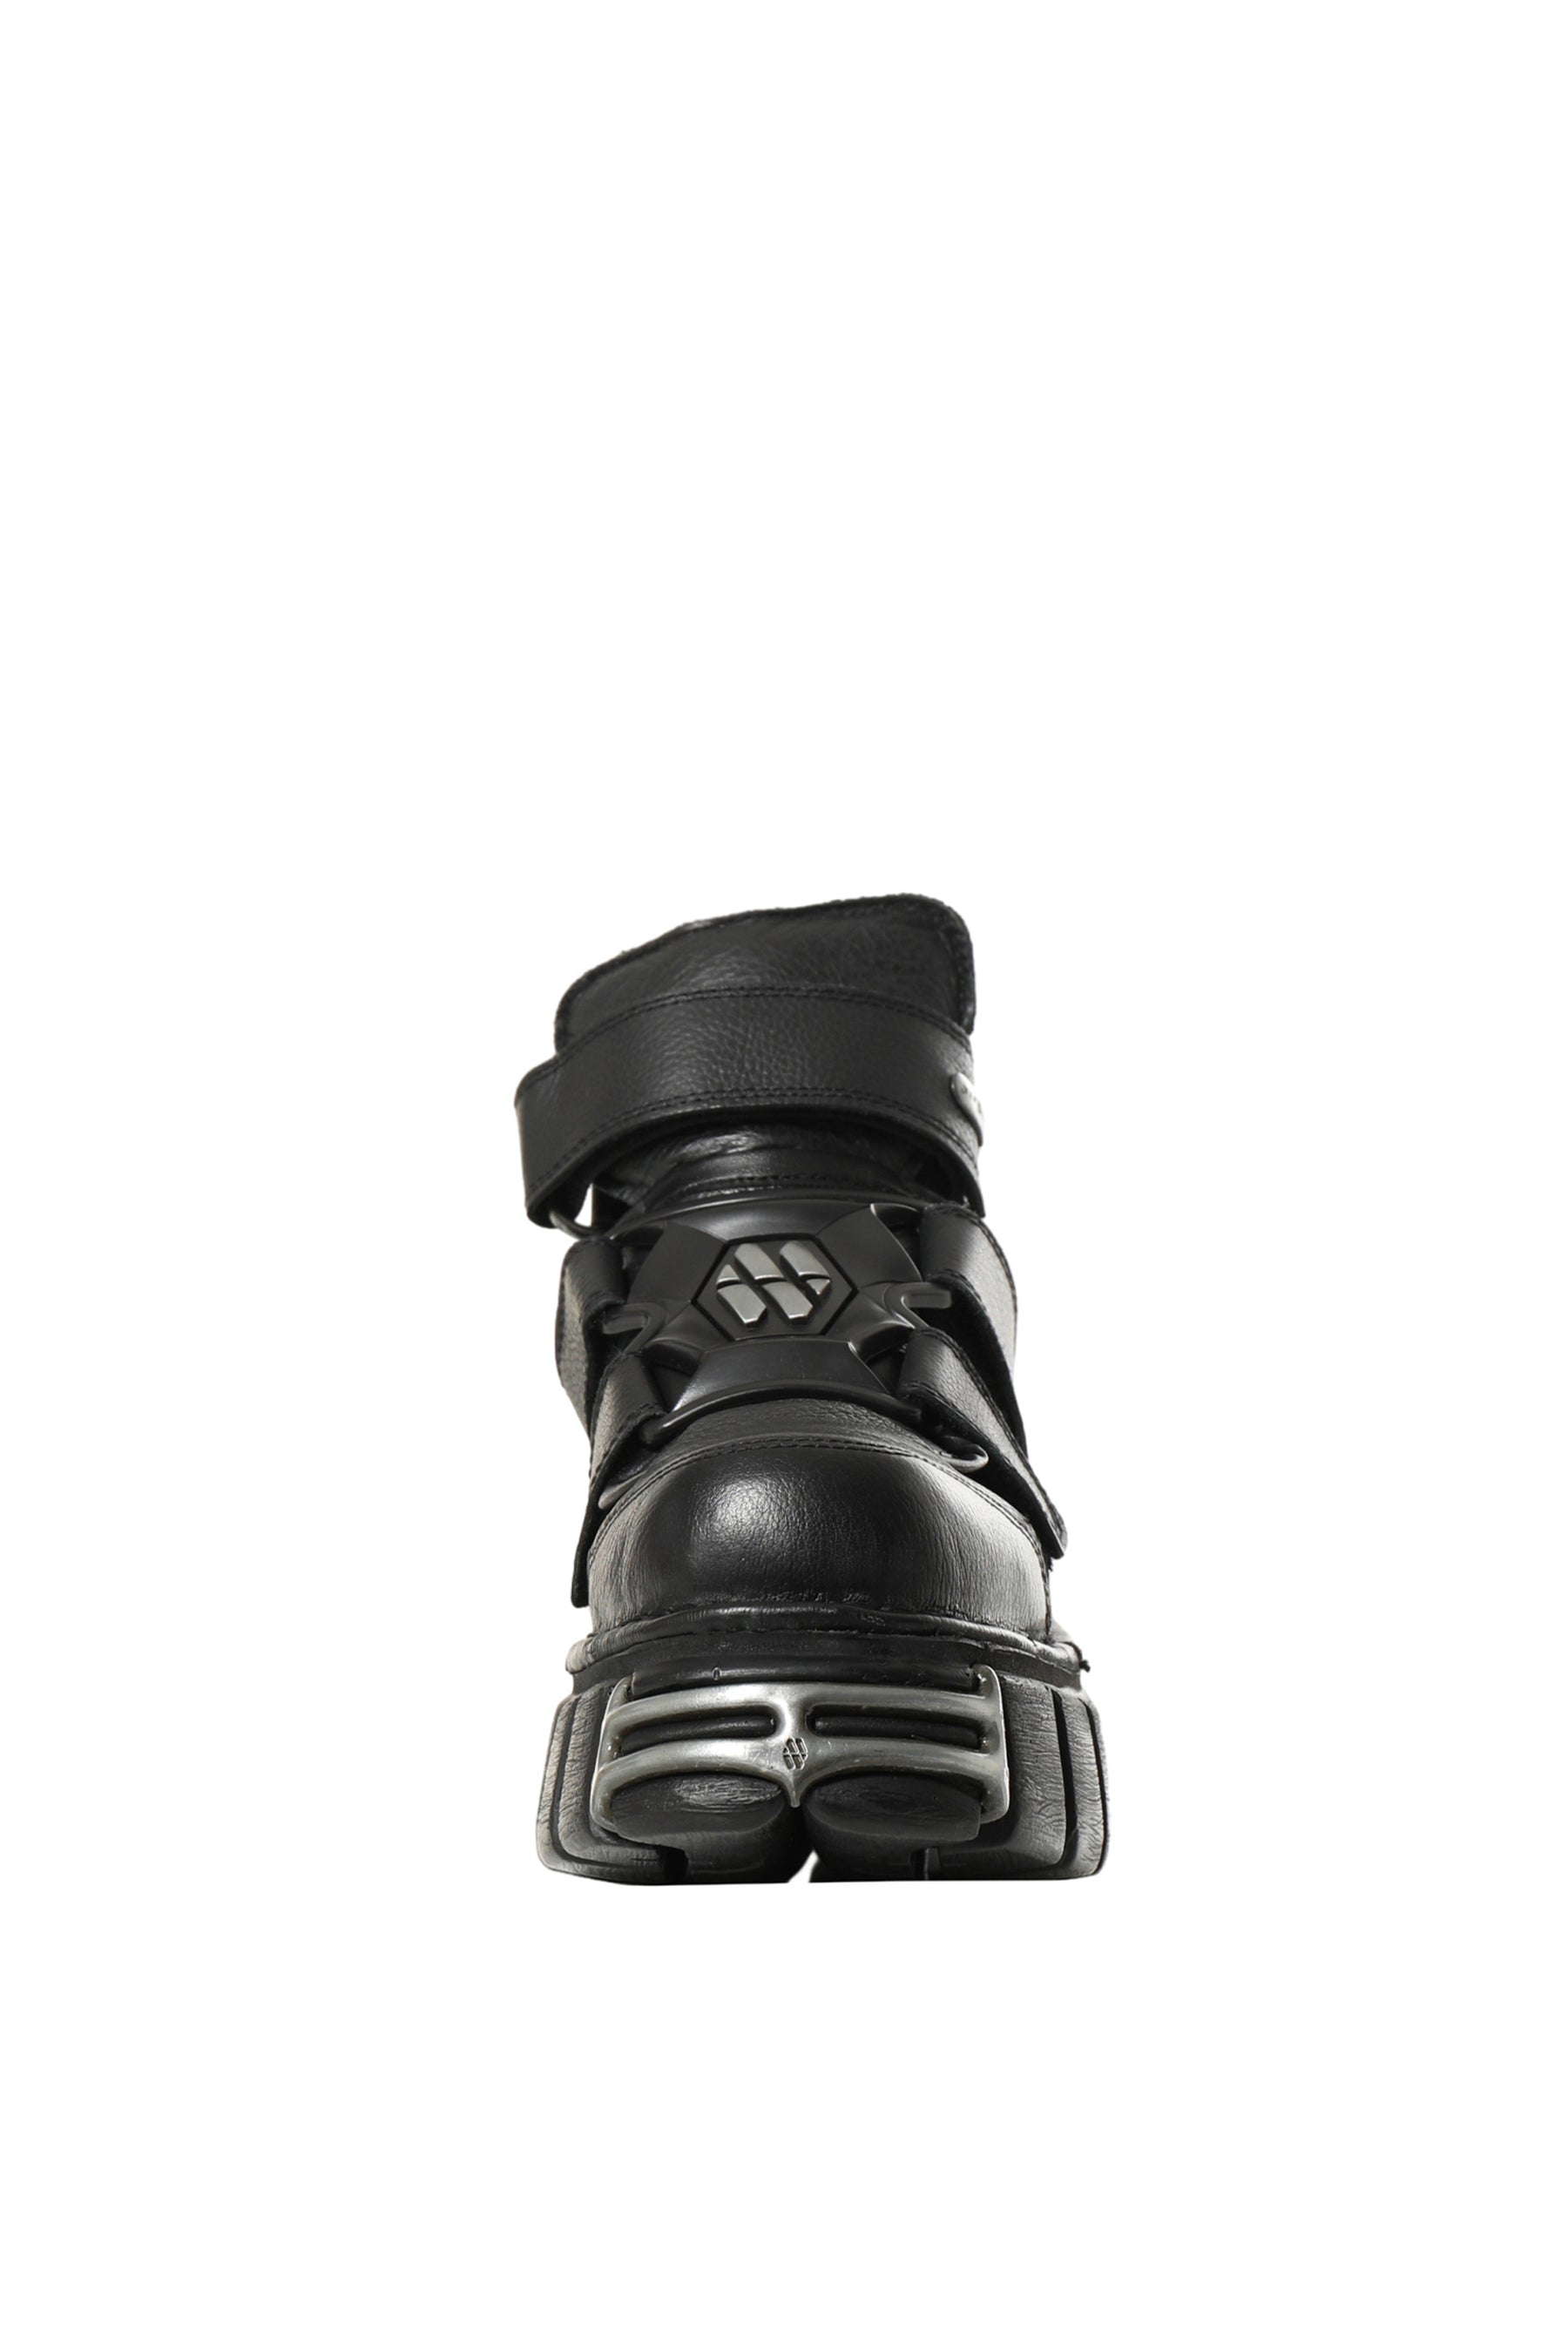 ANKLE BOOT BLACK TOWER / BLK